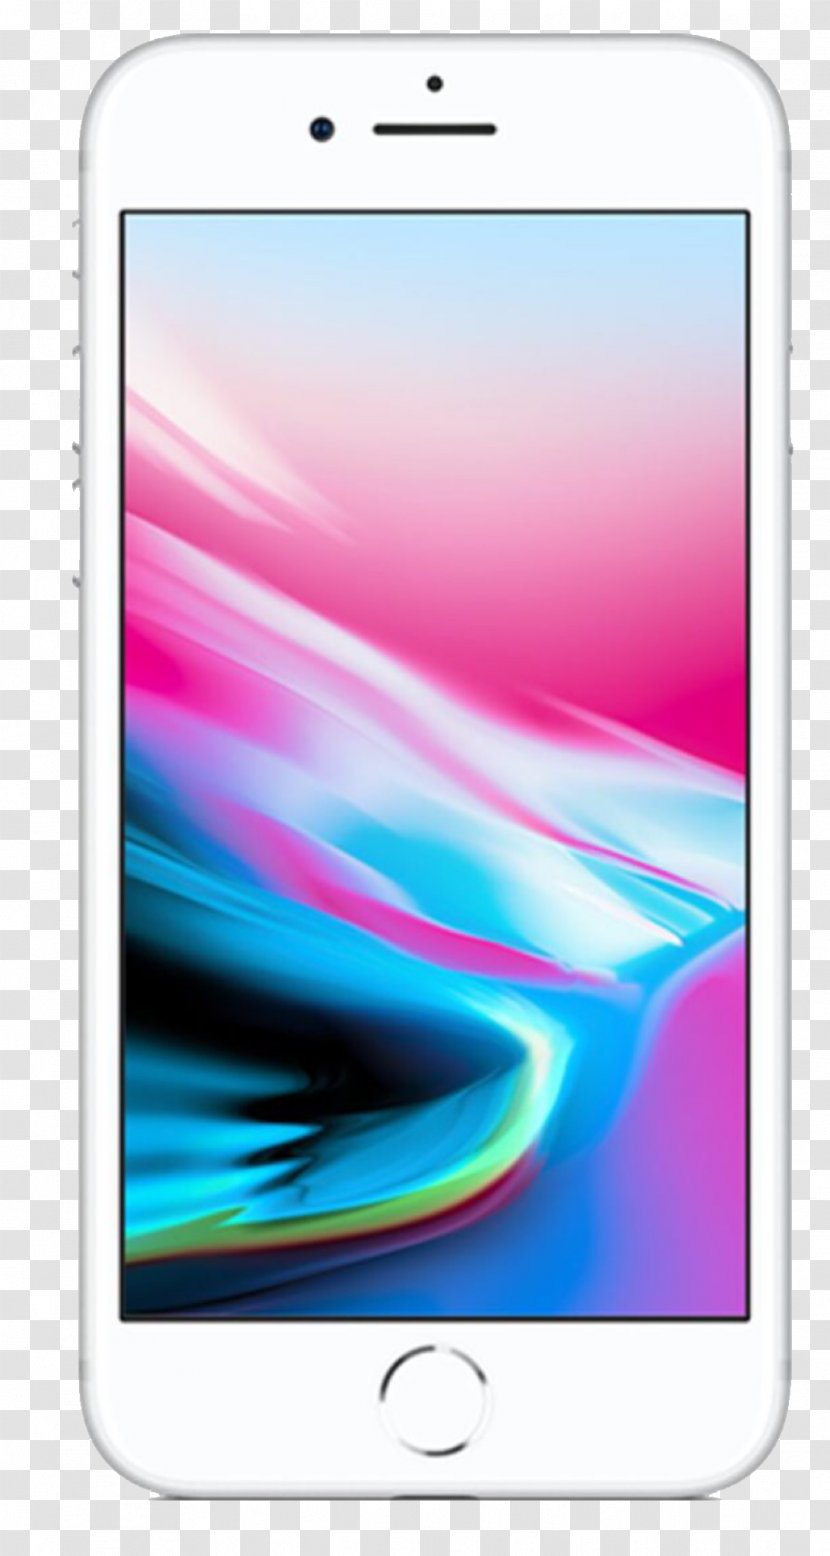 IPhone X Telephone Apple Wireless - Gadget - Iphone Transparent PNG